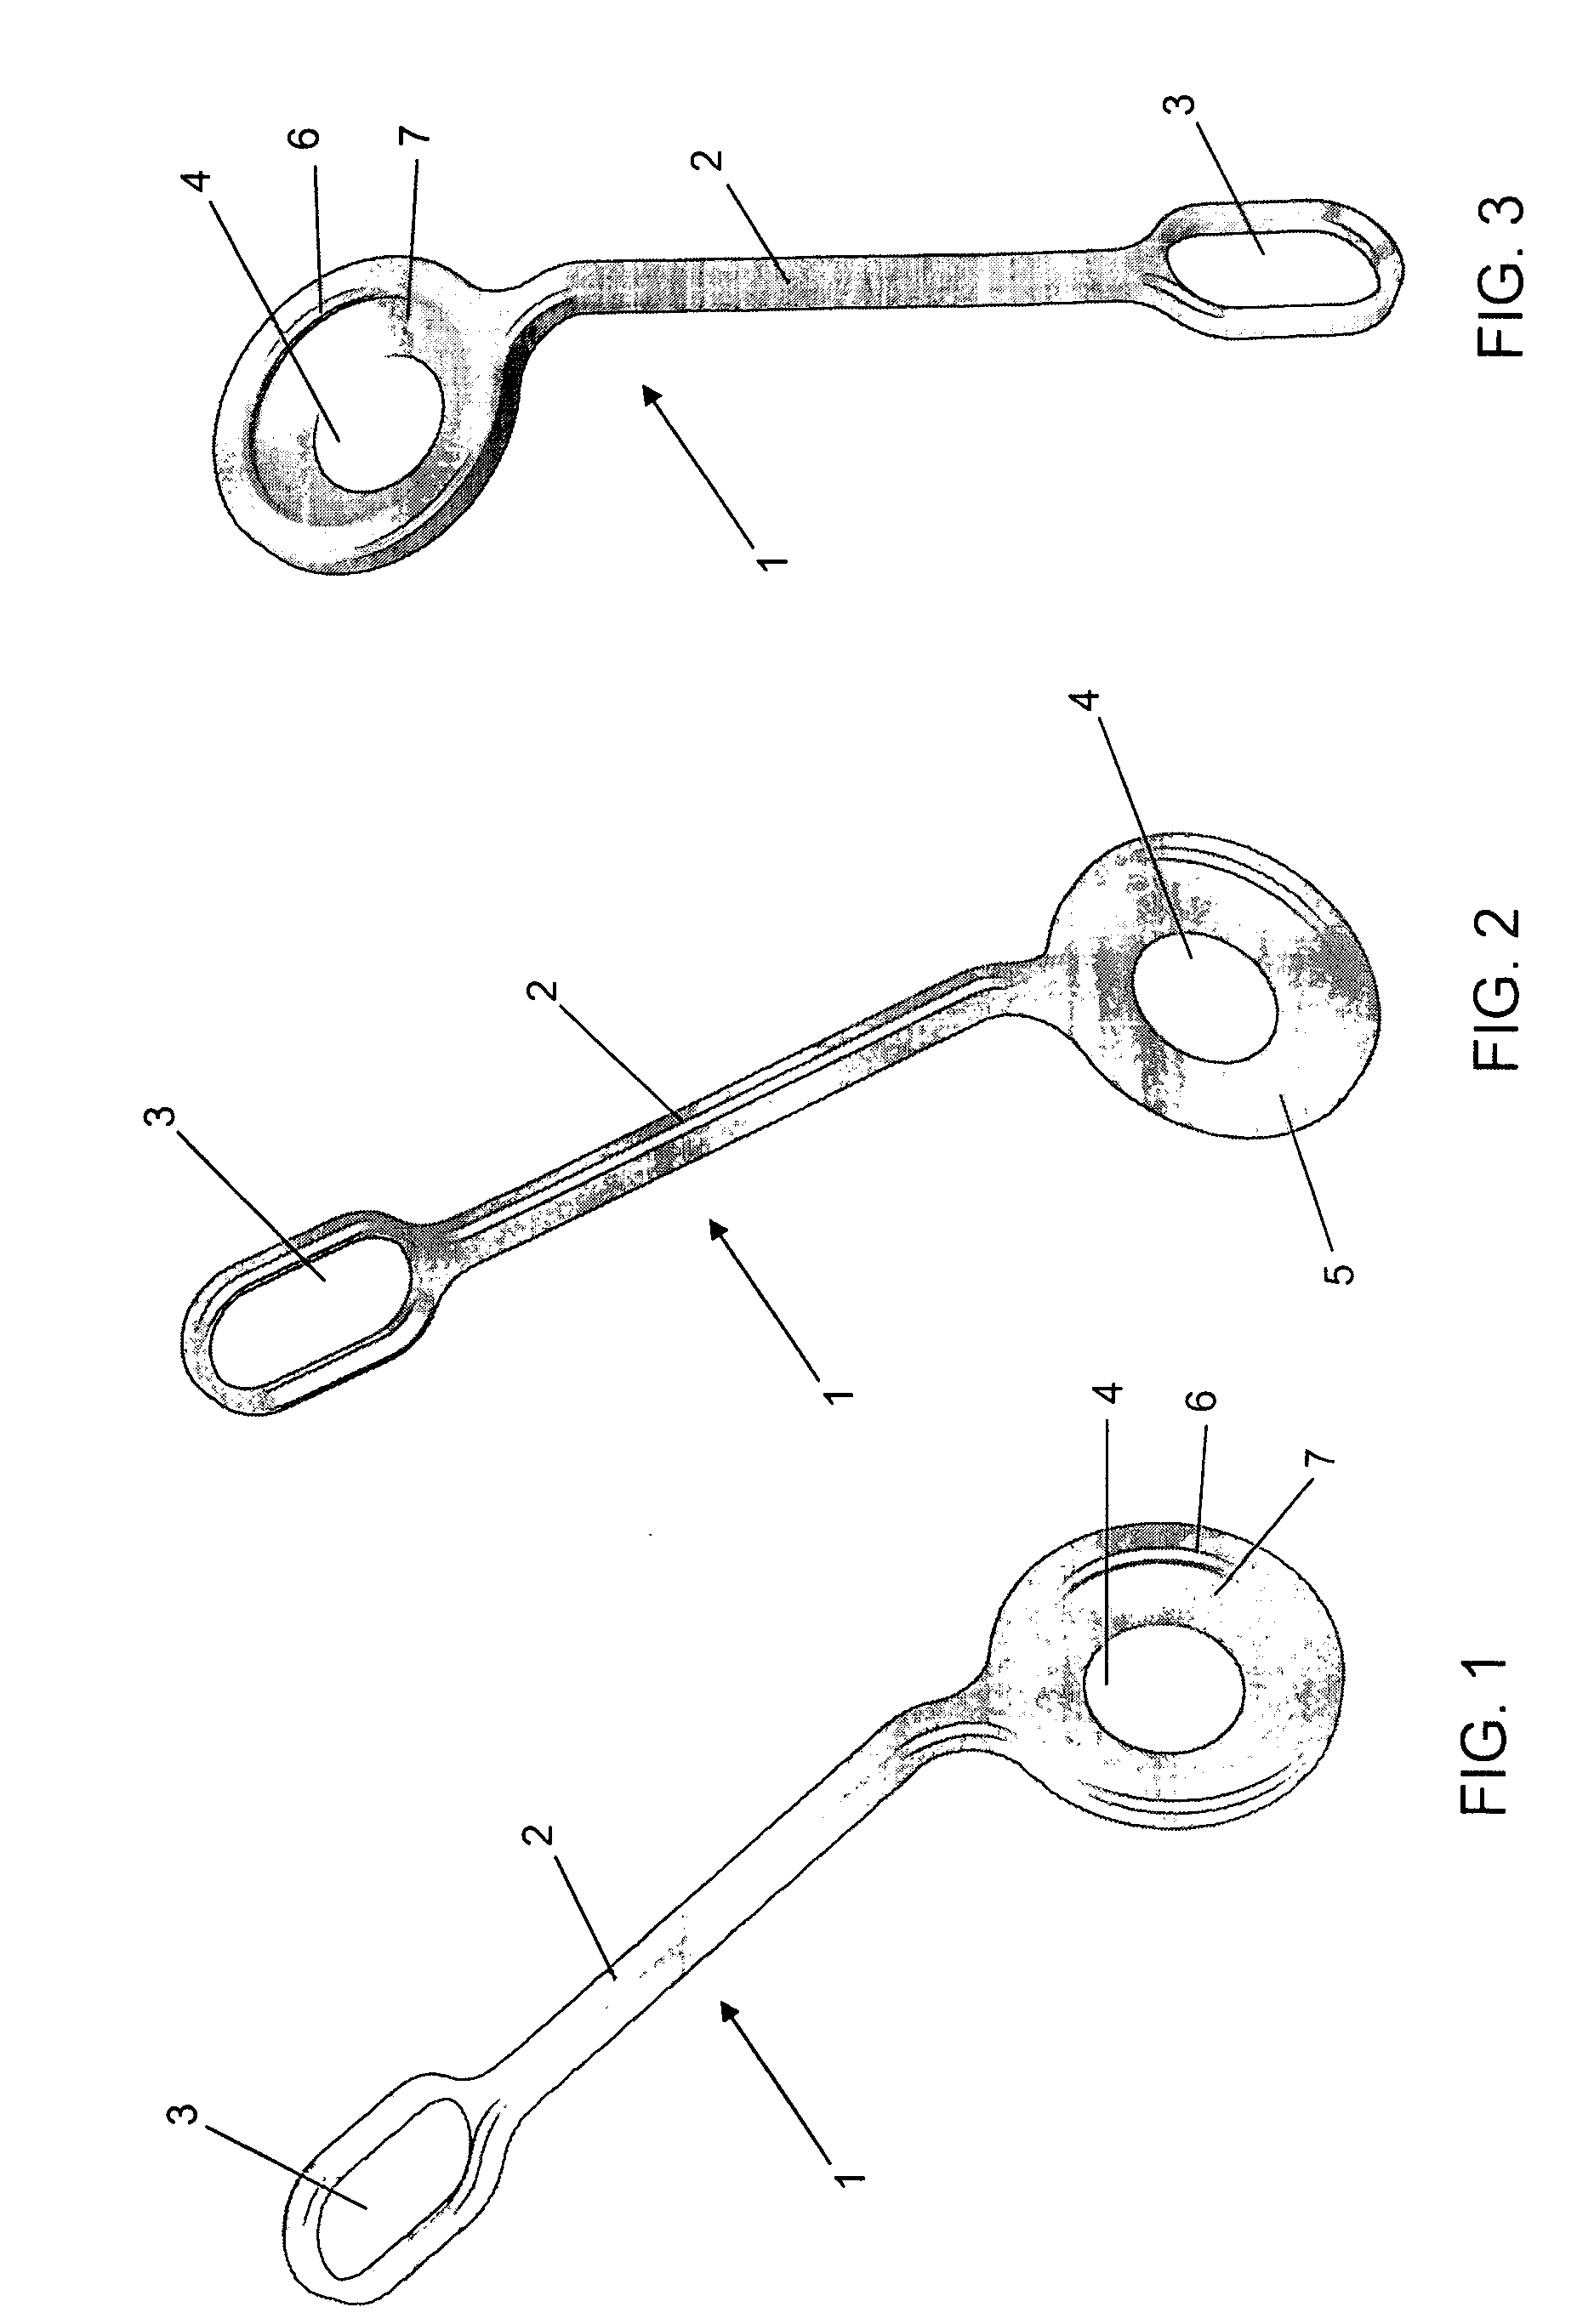 Intraosseous fixation device for reconstructing the knee posterior cruciate ligament